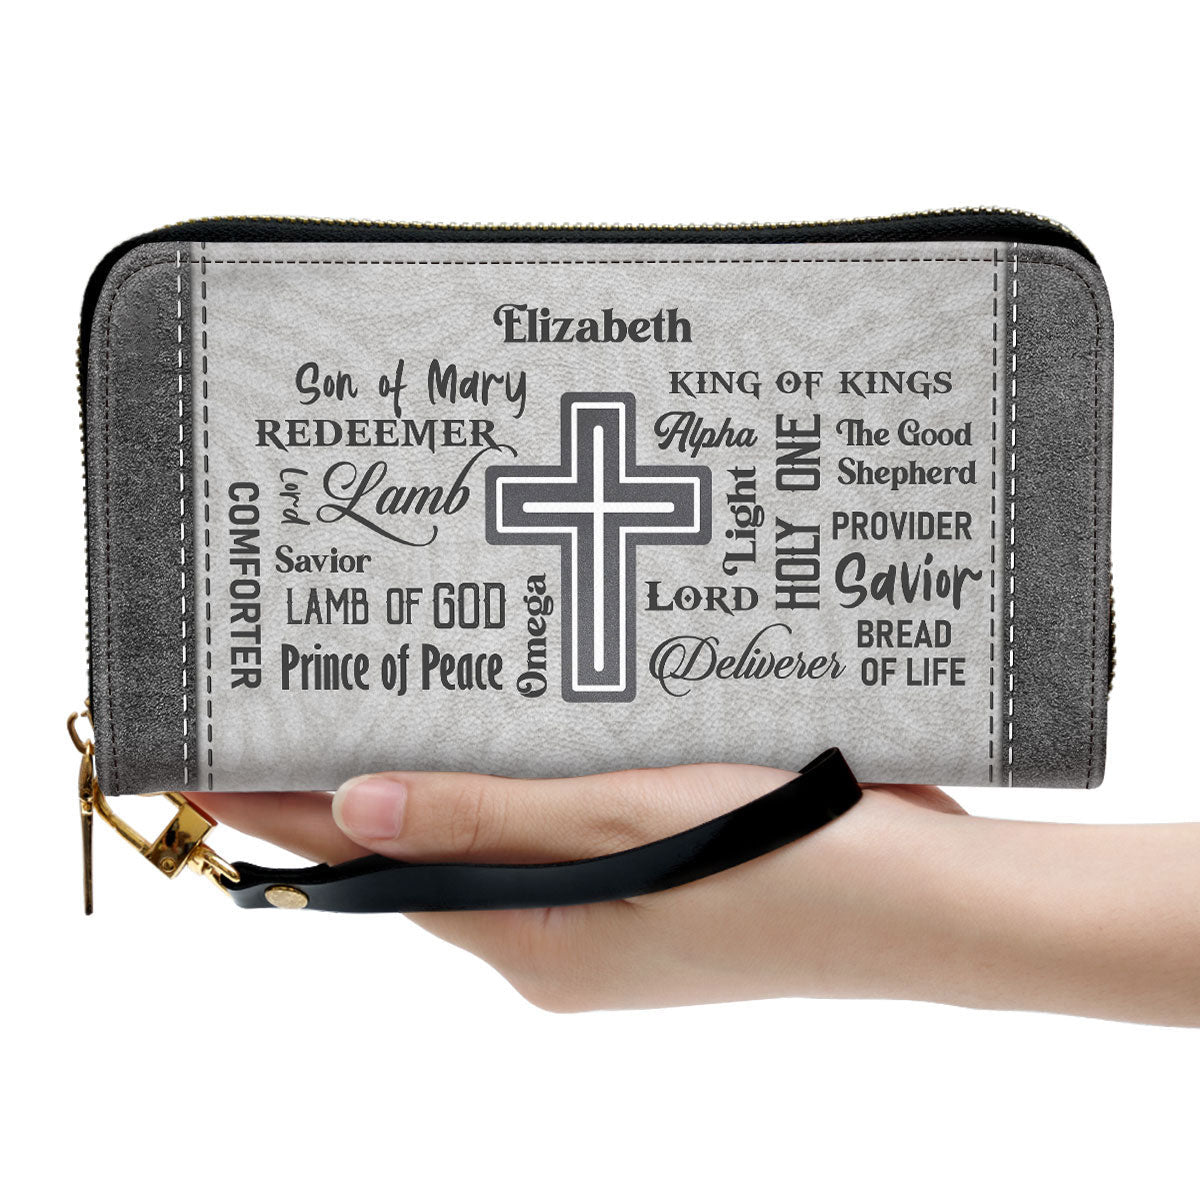 With Wristlet Strap Handle Spiritual Gifts For Women Clutch Purse For Women - Personalized Name - Christian Gifts For Women